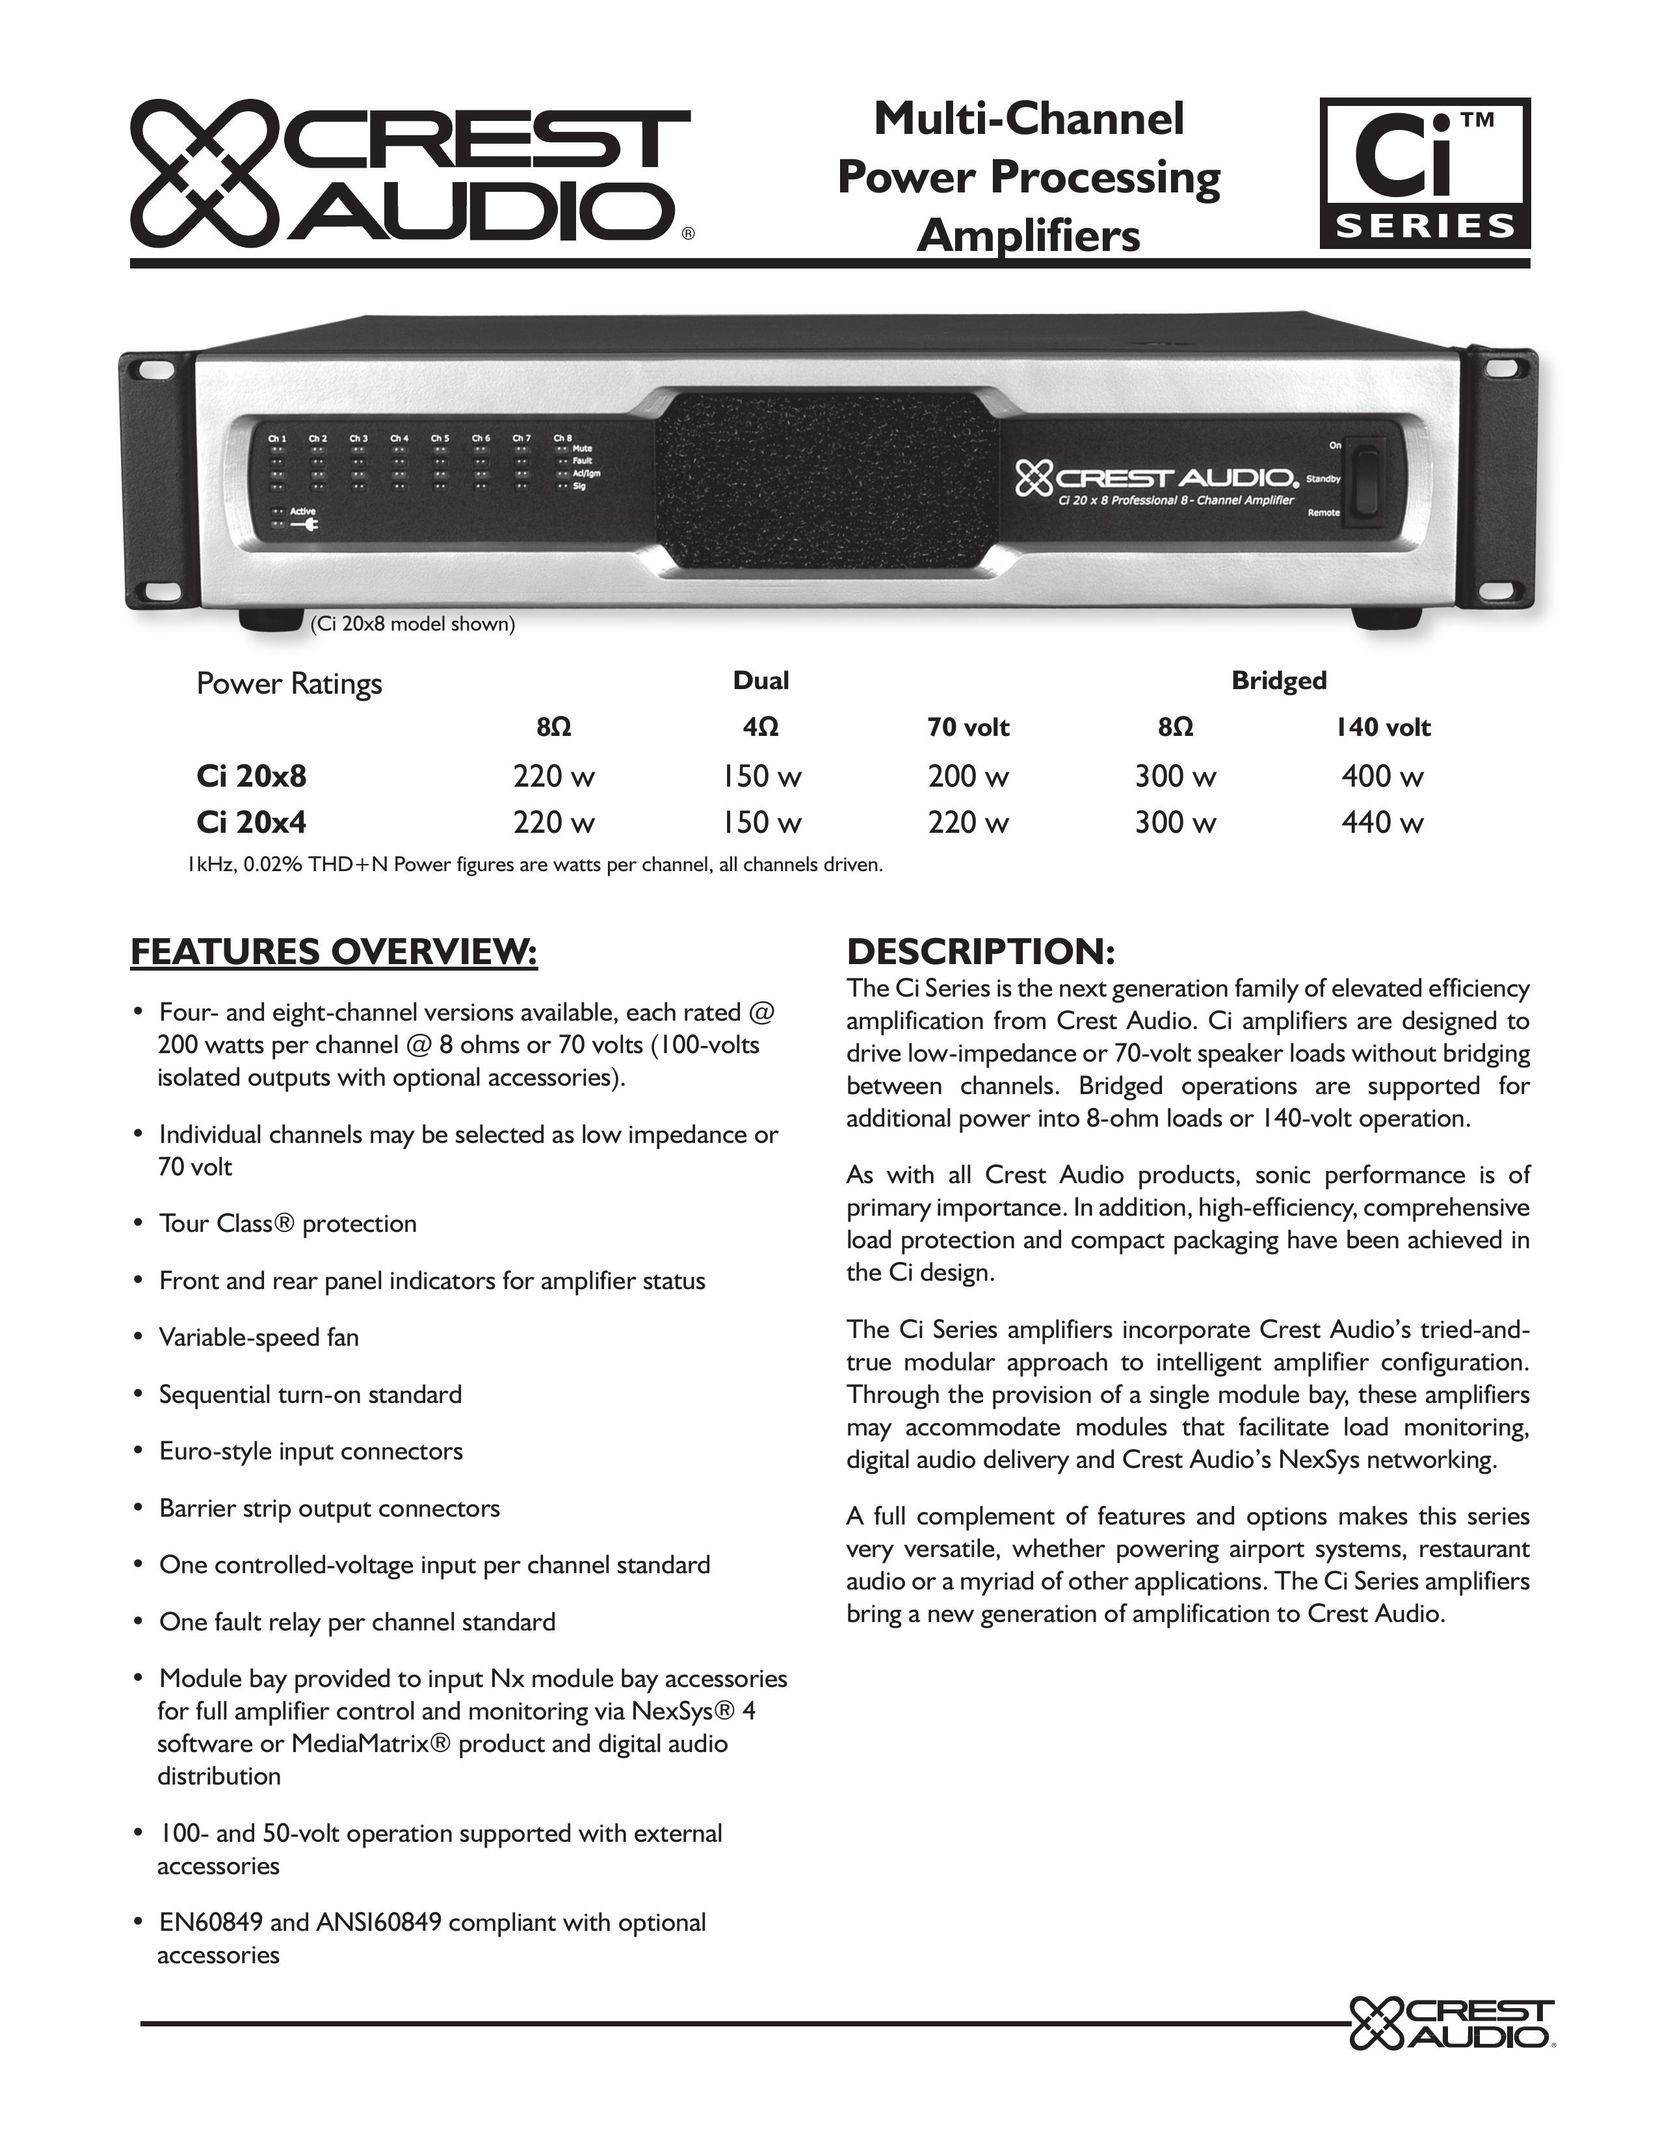 Crest Audio Ci 20 X 4 Stereo Amplifier User Manual